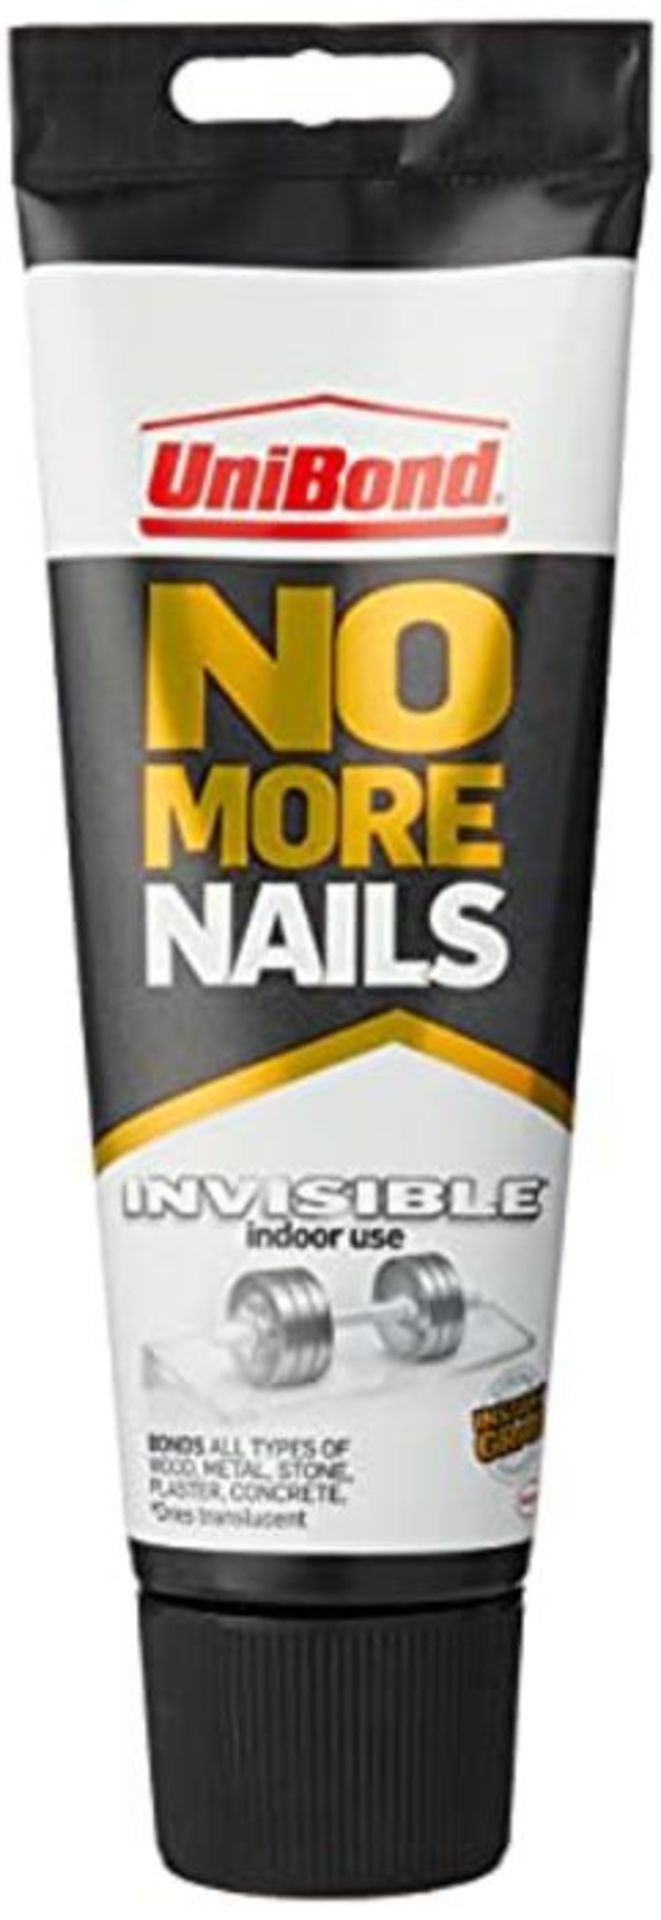 [INCOMPLETE] UniBond 1963625 No More Nails Invisible, Heavy-Duty Clear Glue, Strong Gl